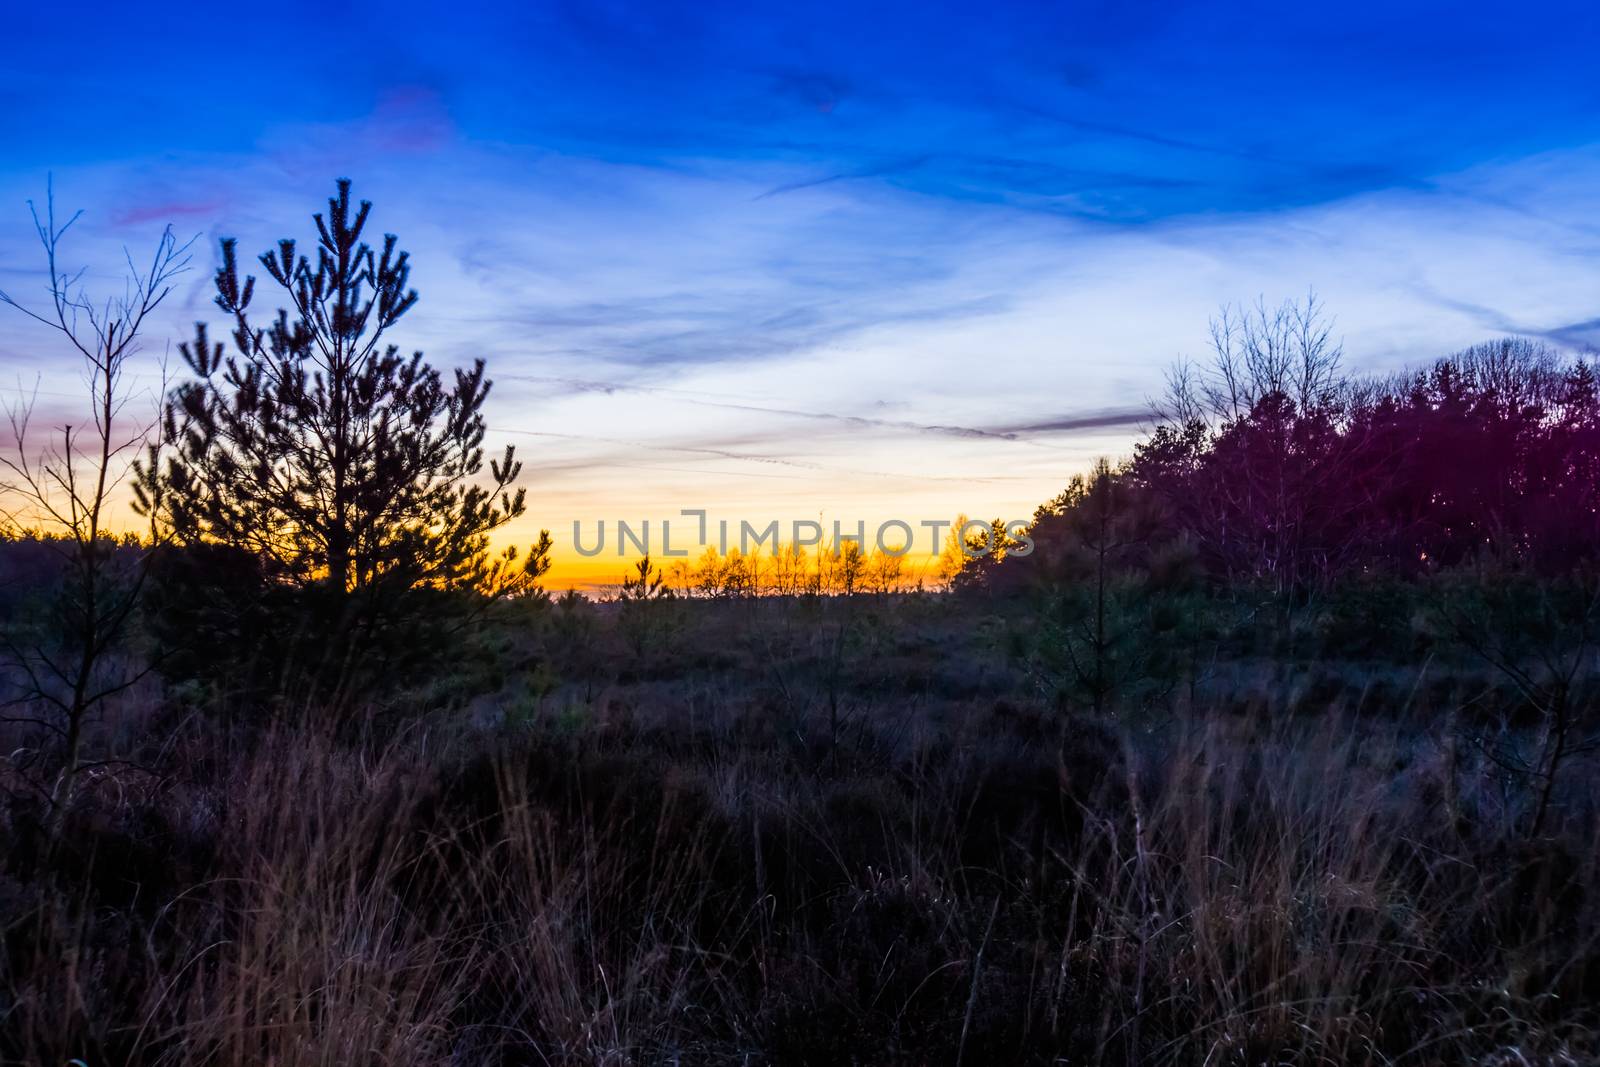 colorful and beautiful sunset on the Rucphense heide, Heather landscape in the forest of Rucphen, The Netherlands by charlottebleijenberg